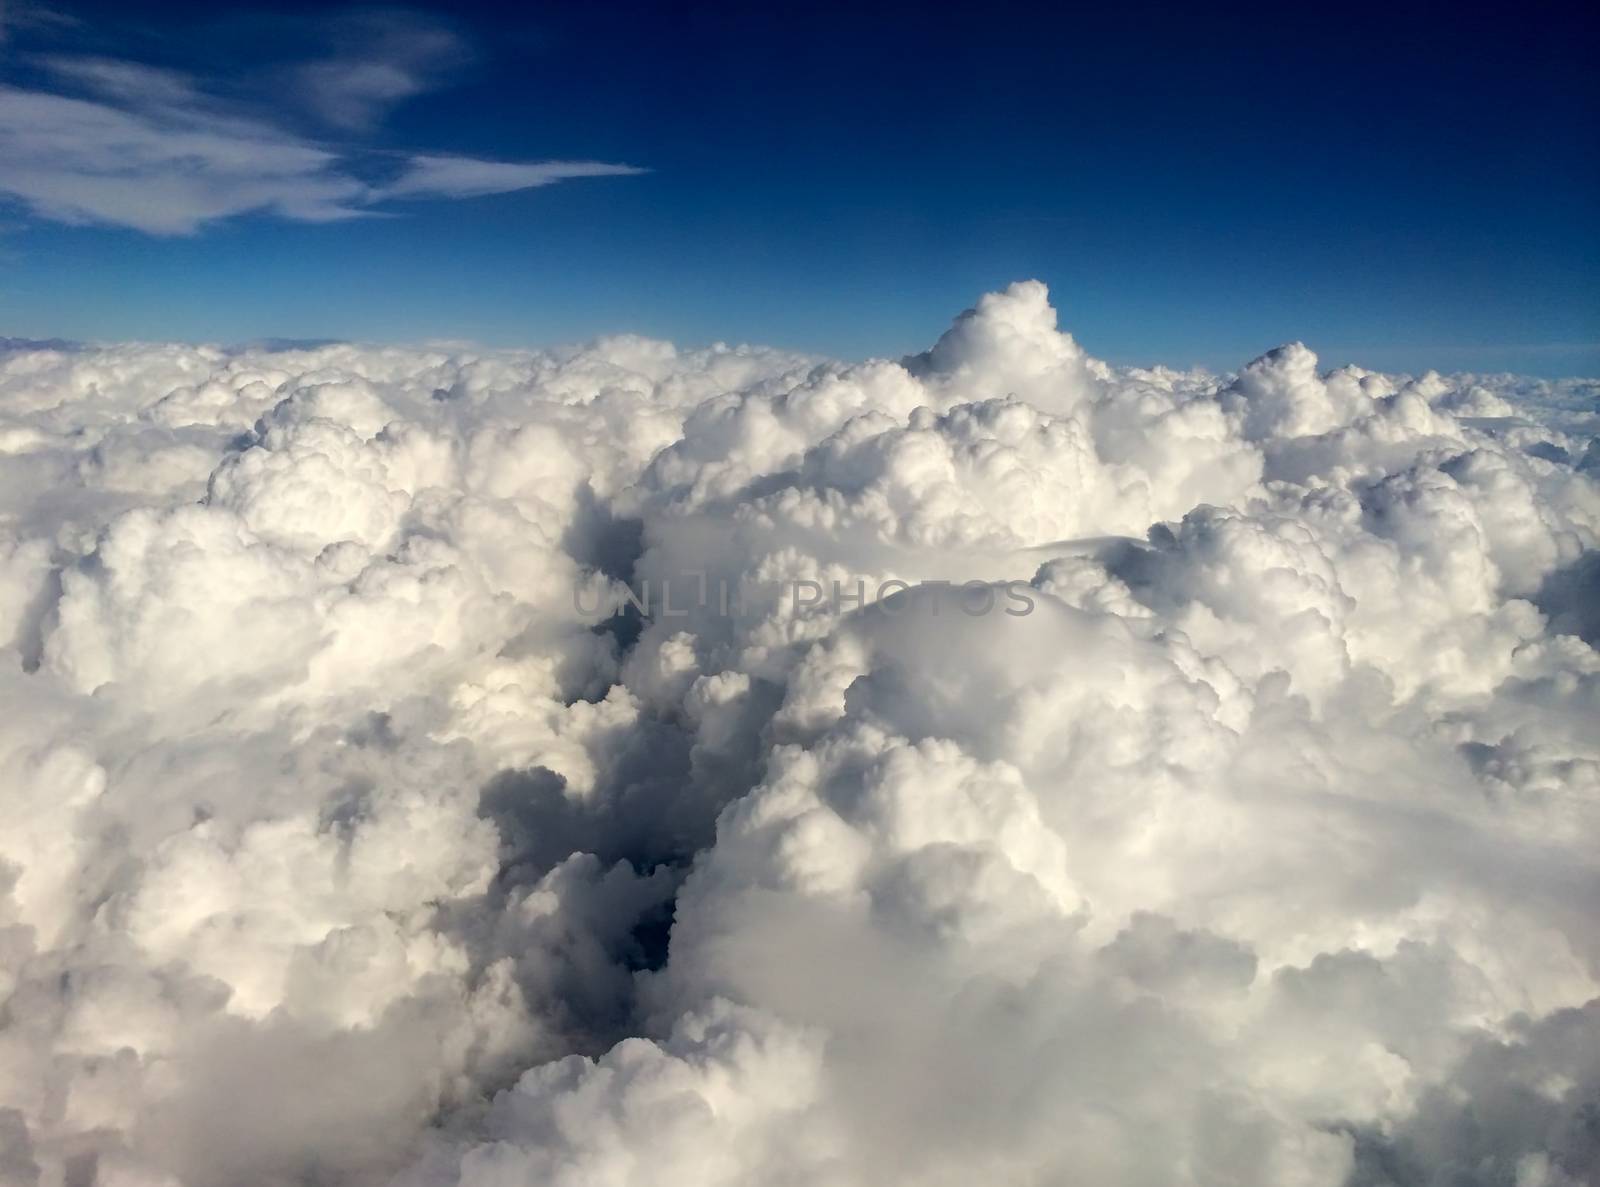 Sky with clouds as seen from airplane by jovannig